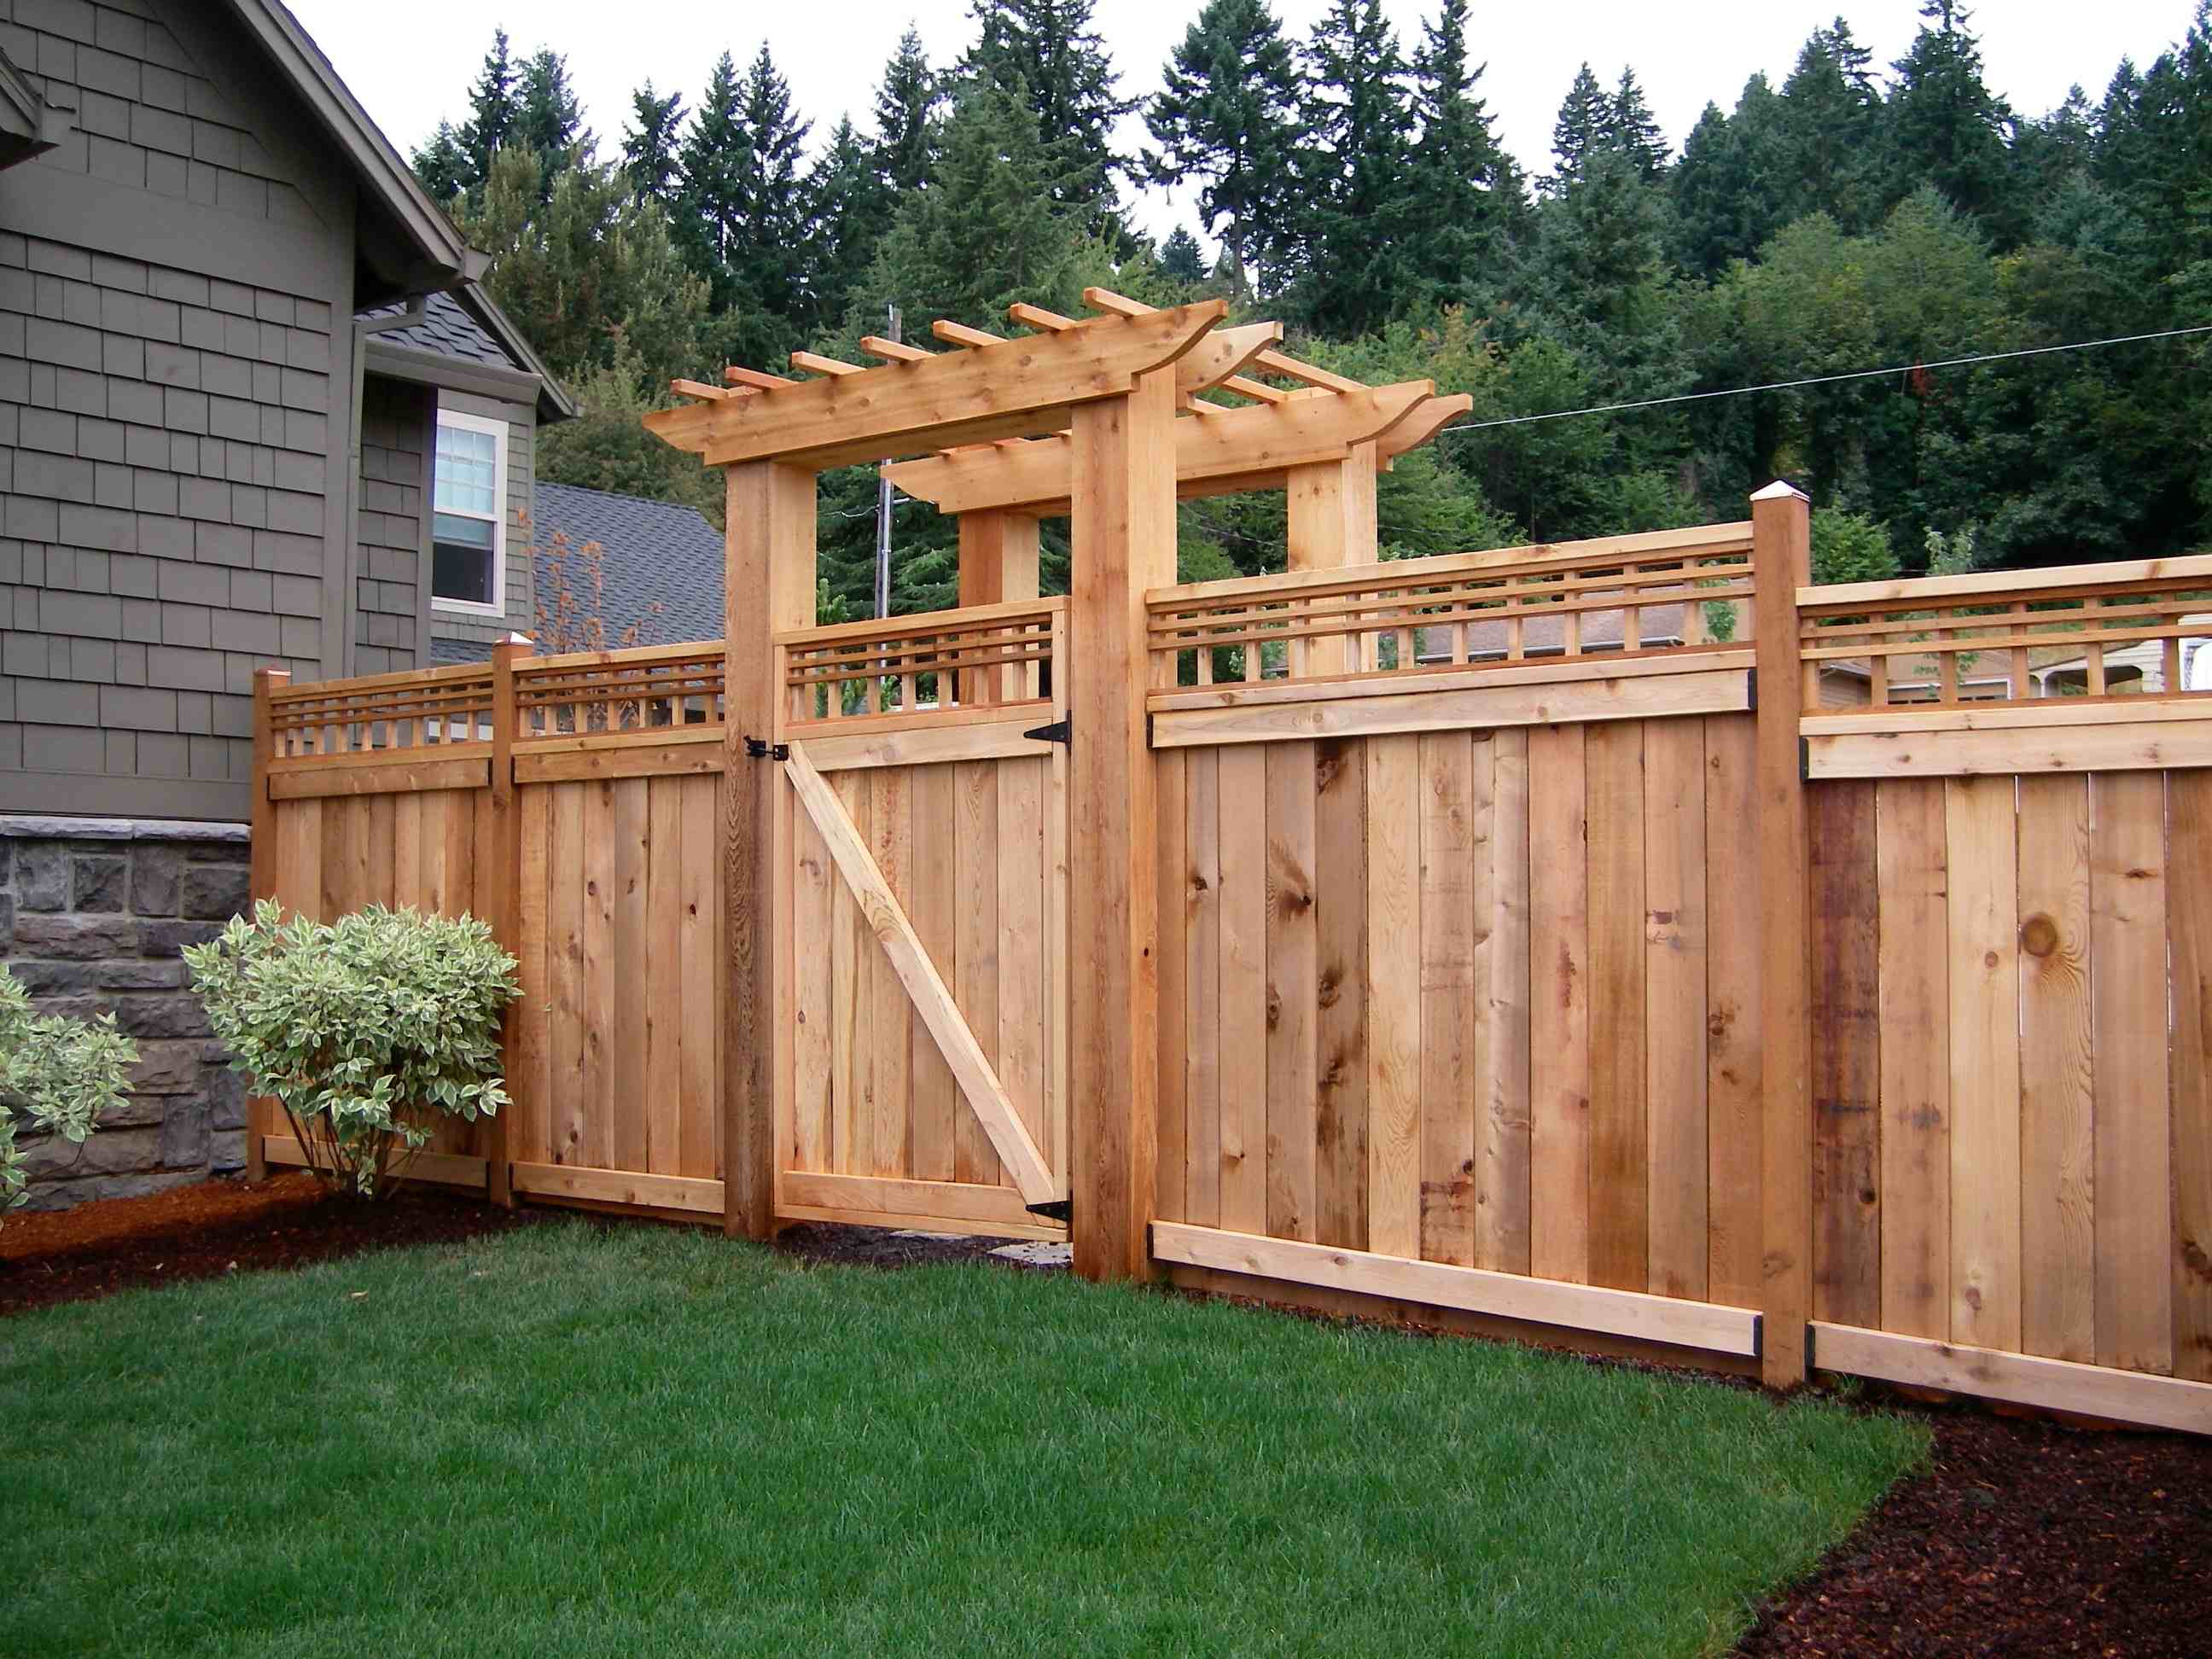 Building A Wooden Fence | Wonderful Woodworking